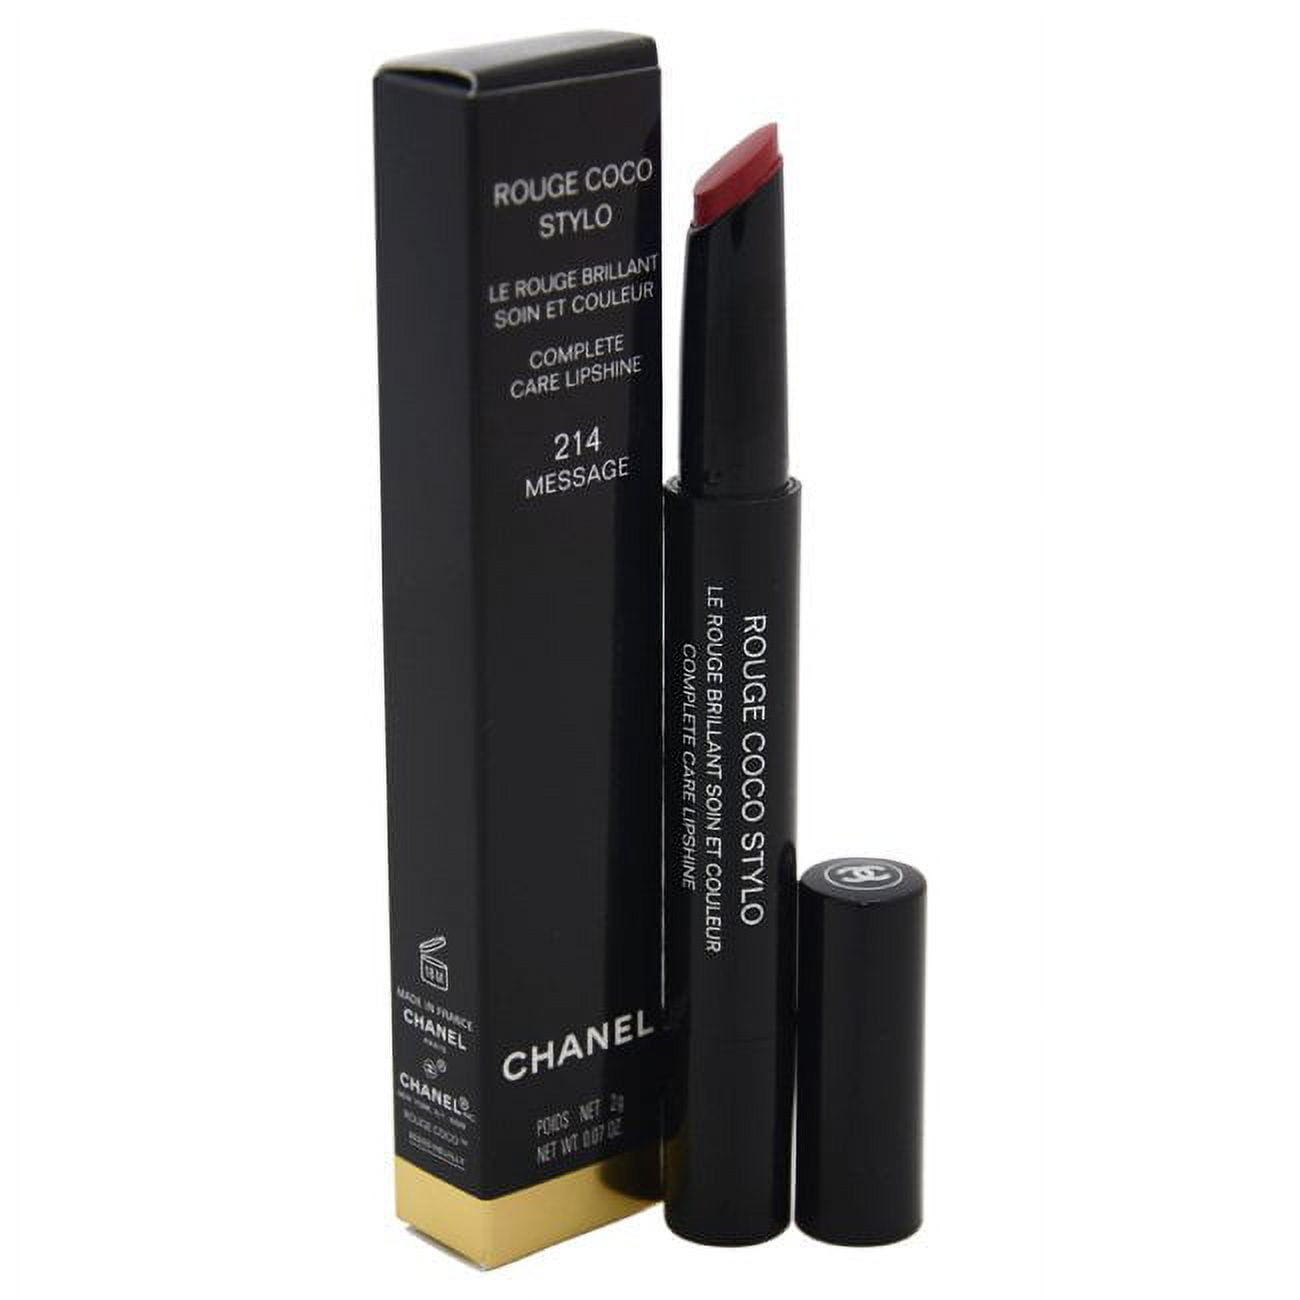 Rouge Coco Stylo Complete Care Lipshine - 214 Message by Chanel for Women -  0.07 oz Lipstick 